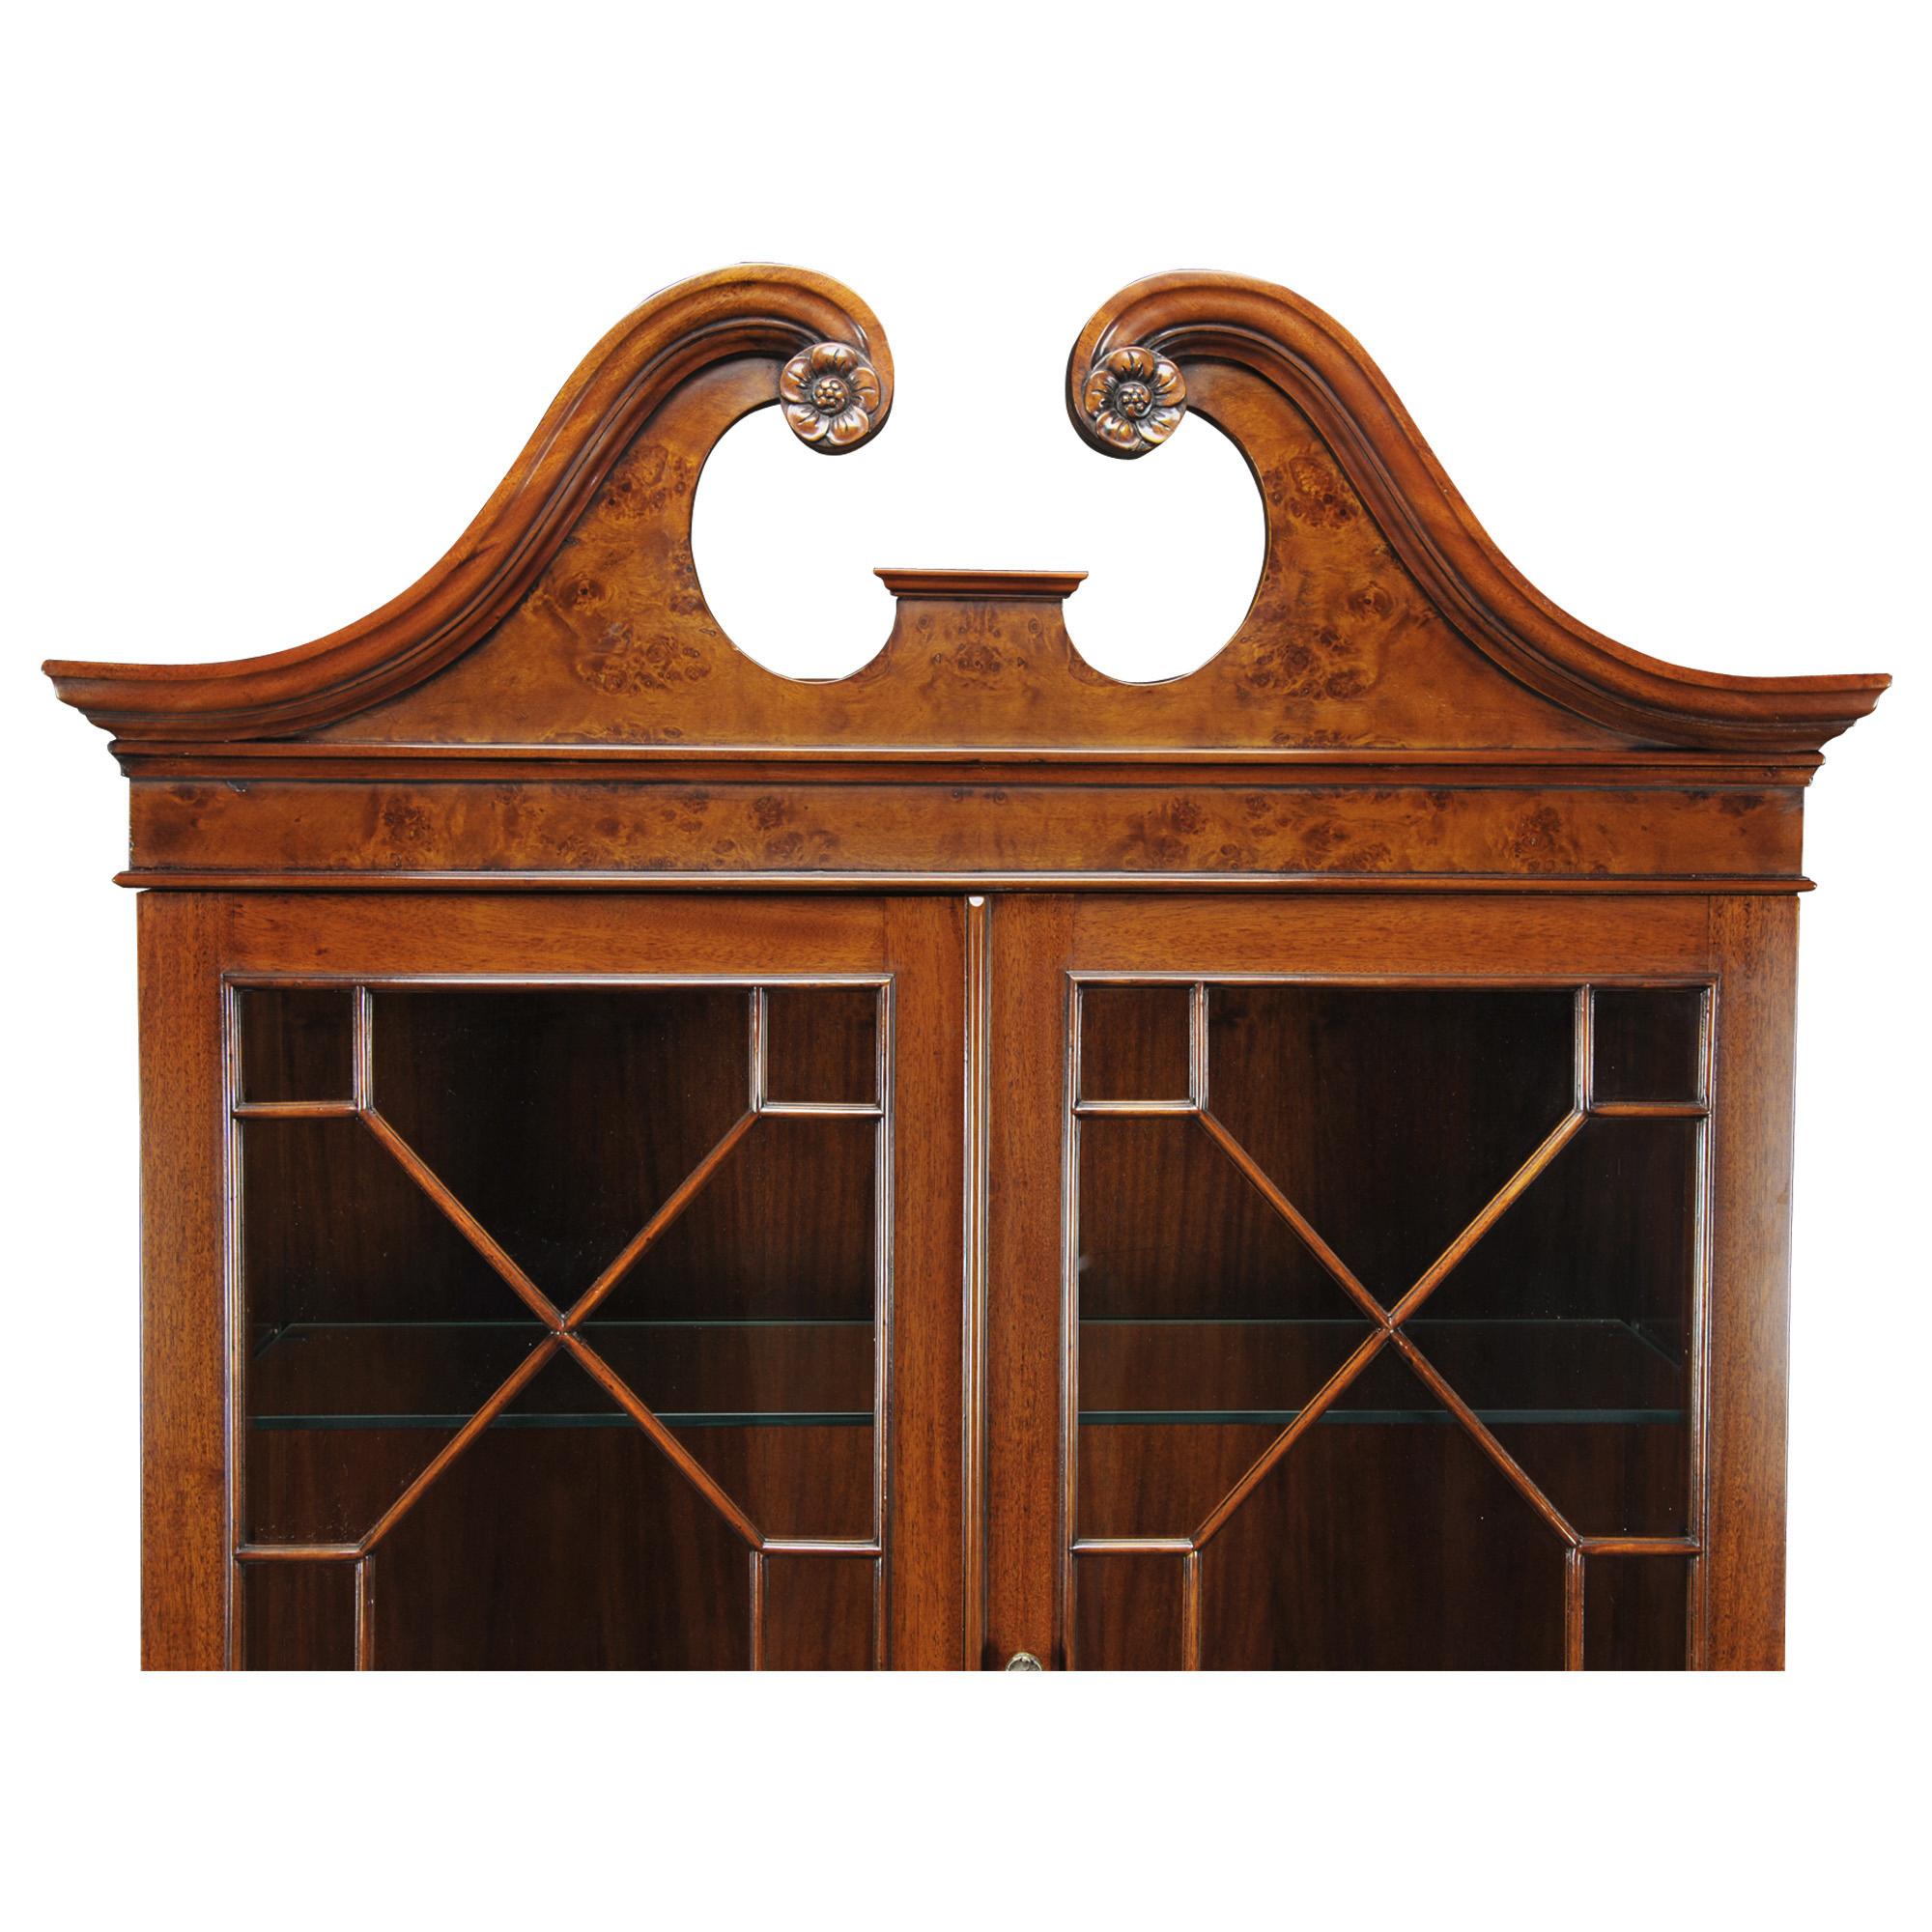 This Burled Secretary Desk from Niagara Furniture has all the features of an antique original. Made of high quality mahogany solids and burled veneers, the bookcase has a lovely swan neck pediment. There are two glass shelves in the upper section of